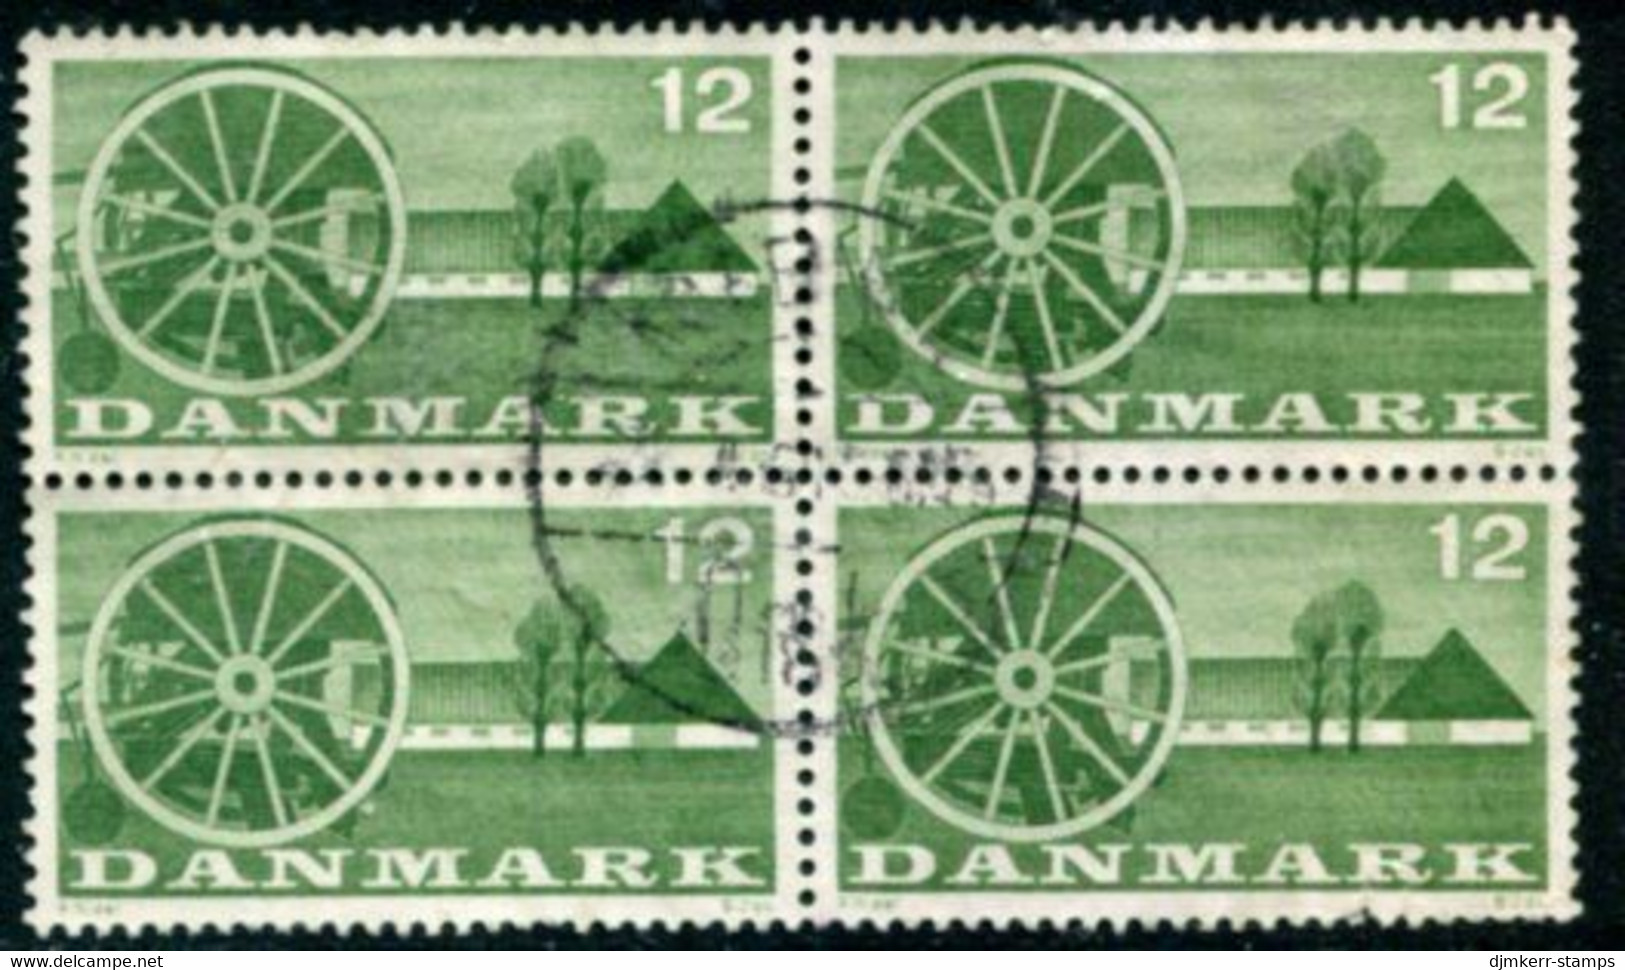 DENMARK 1960 Agriculture 12 Øre Block Of 4 Used   Michel 378 - Usati